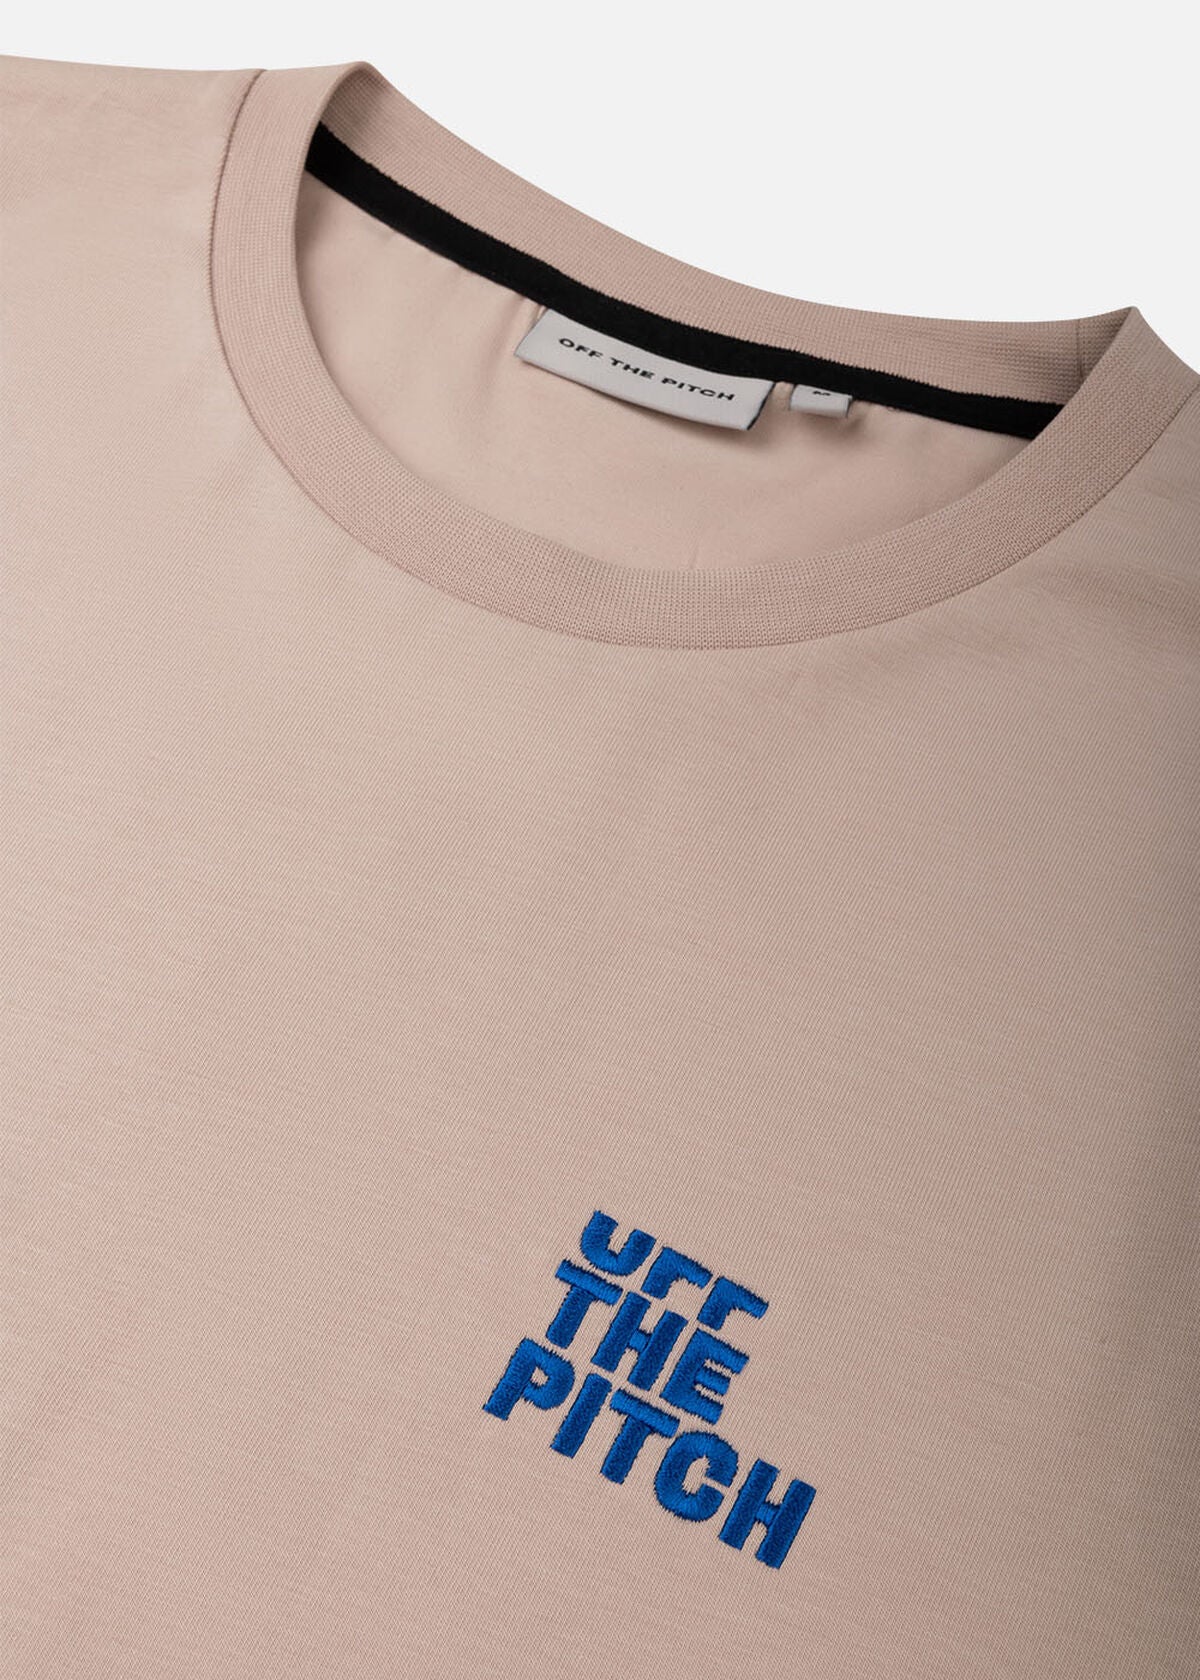 OFF THE PITCH FULLSTOP SLIM FIT TEE